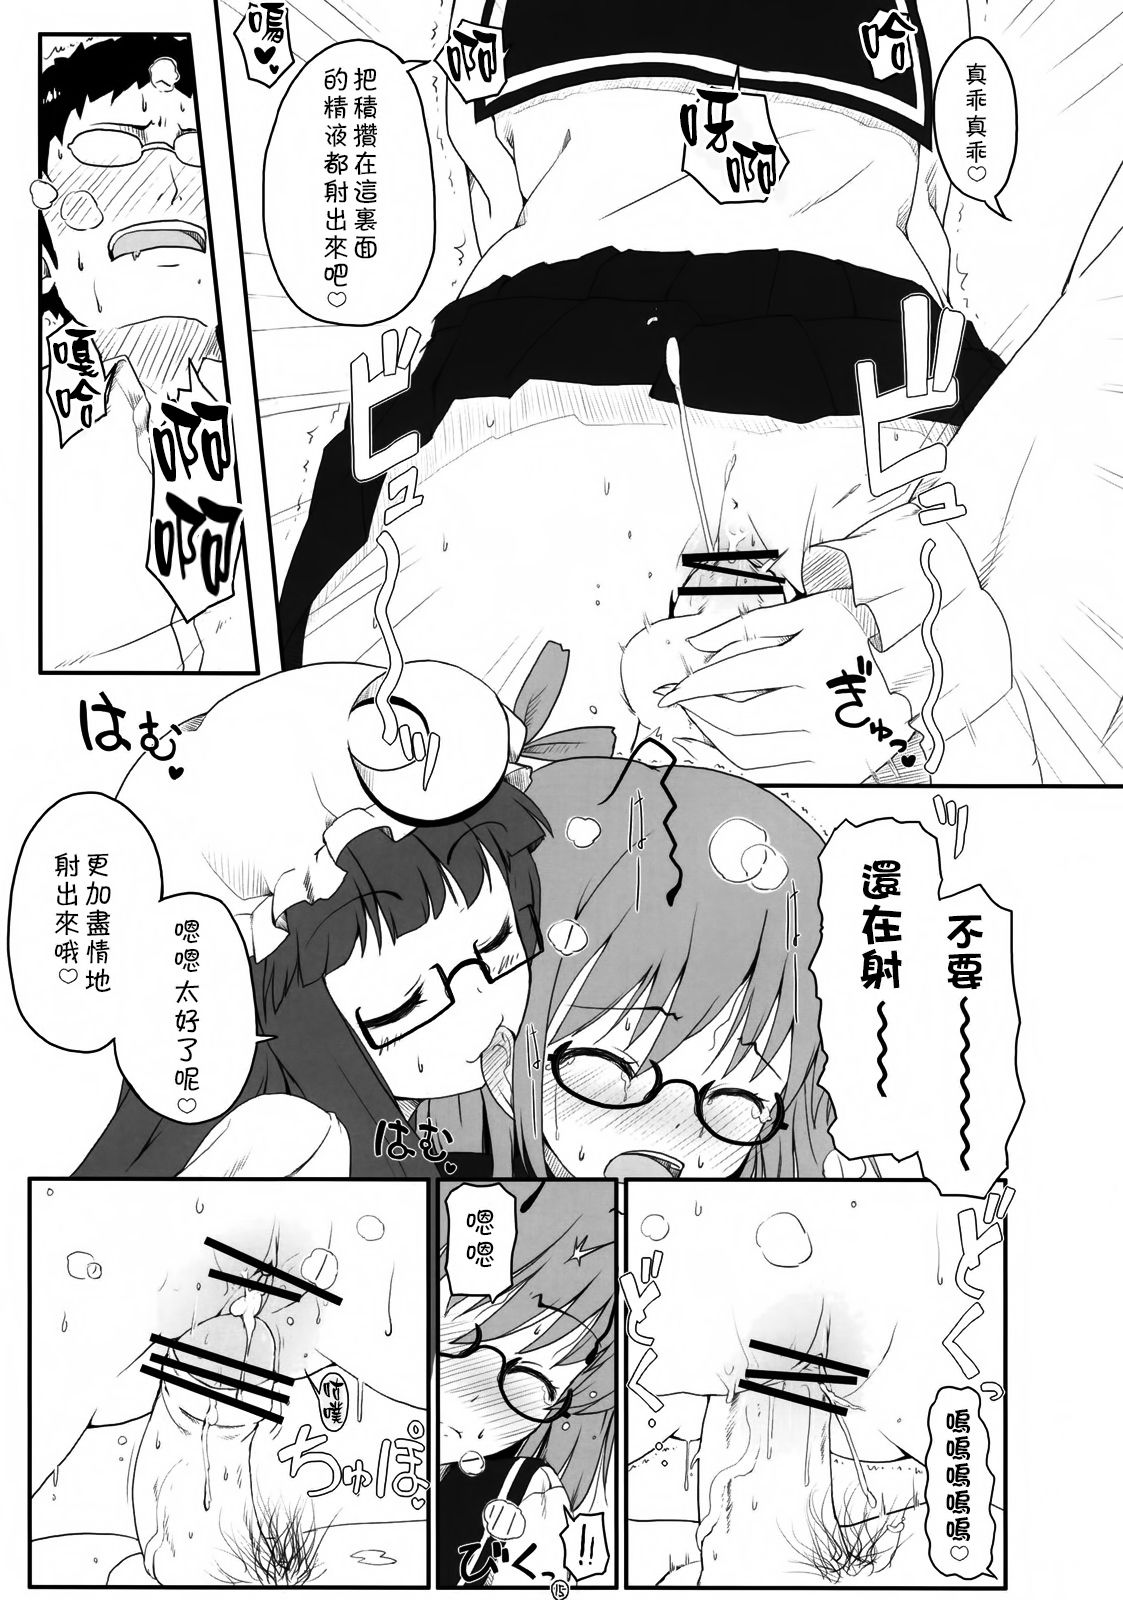 (C75) [Itou Life] Touhou Megane (Touhou Project) [Chinese] [无毒汉化组] (C75) [伊東ライフ] 東方眼鏡 (東方Project) [中国翻訳]